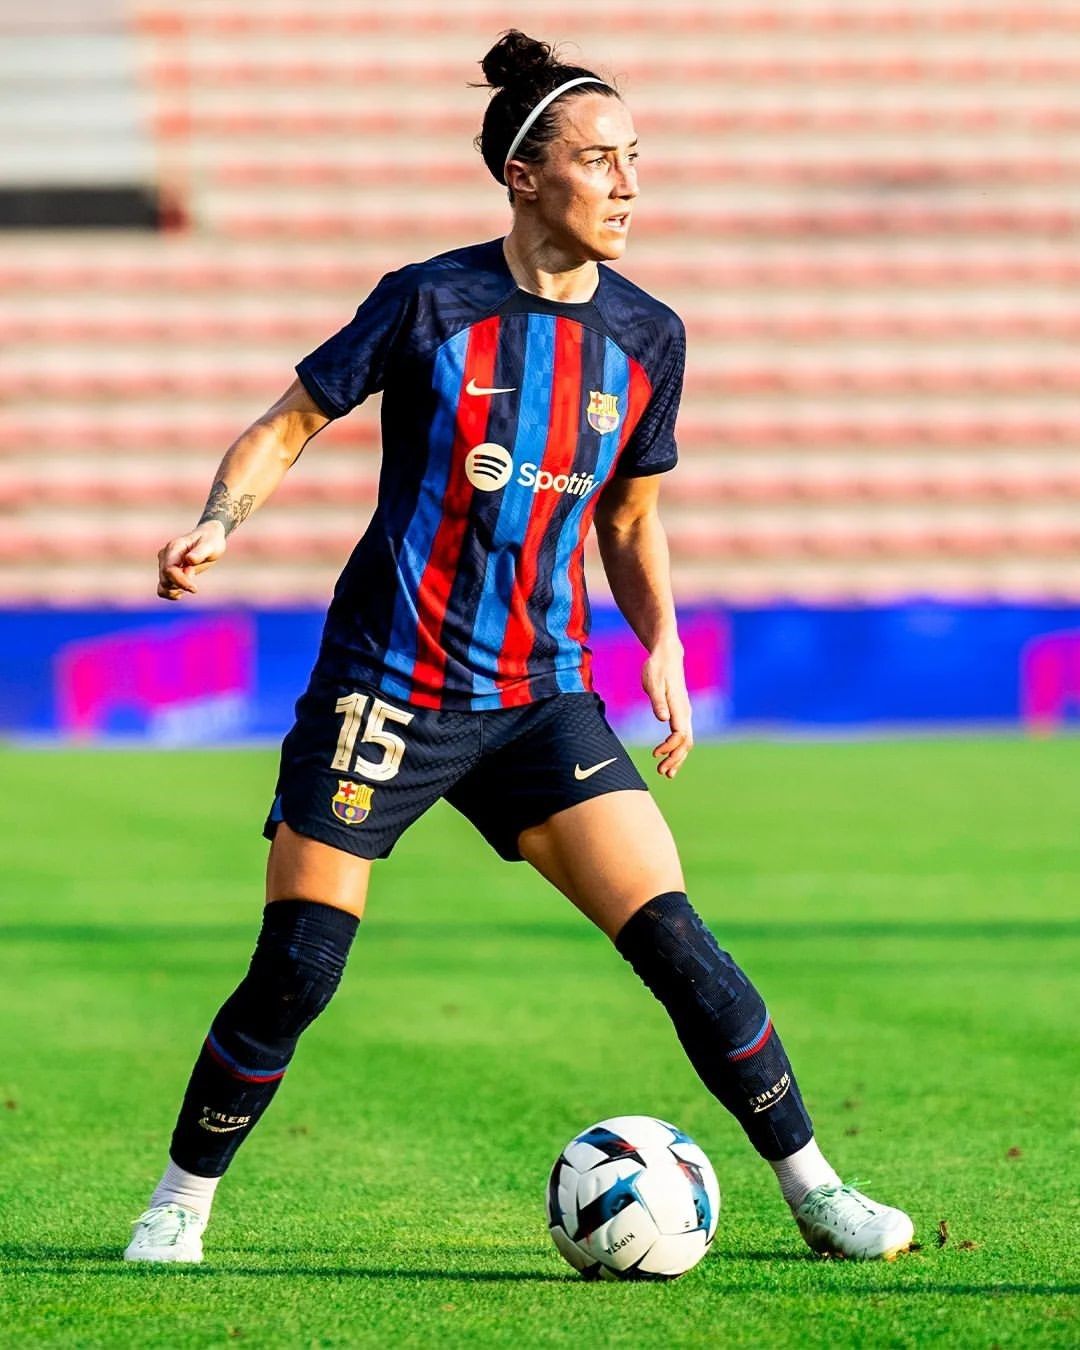 Best female footballers in the world ranked 2023